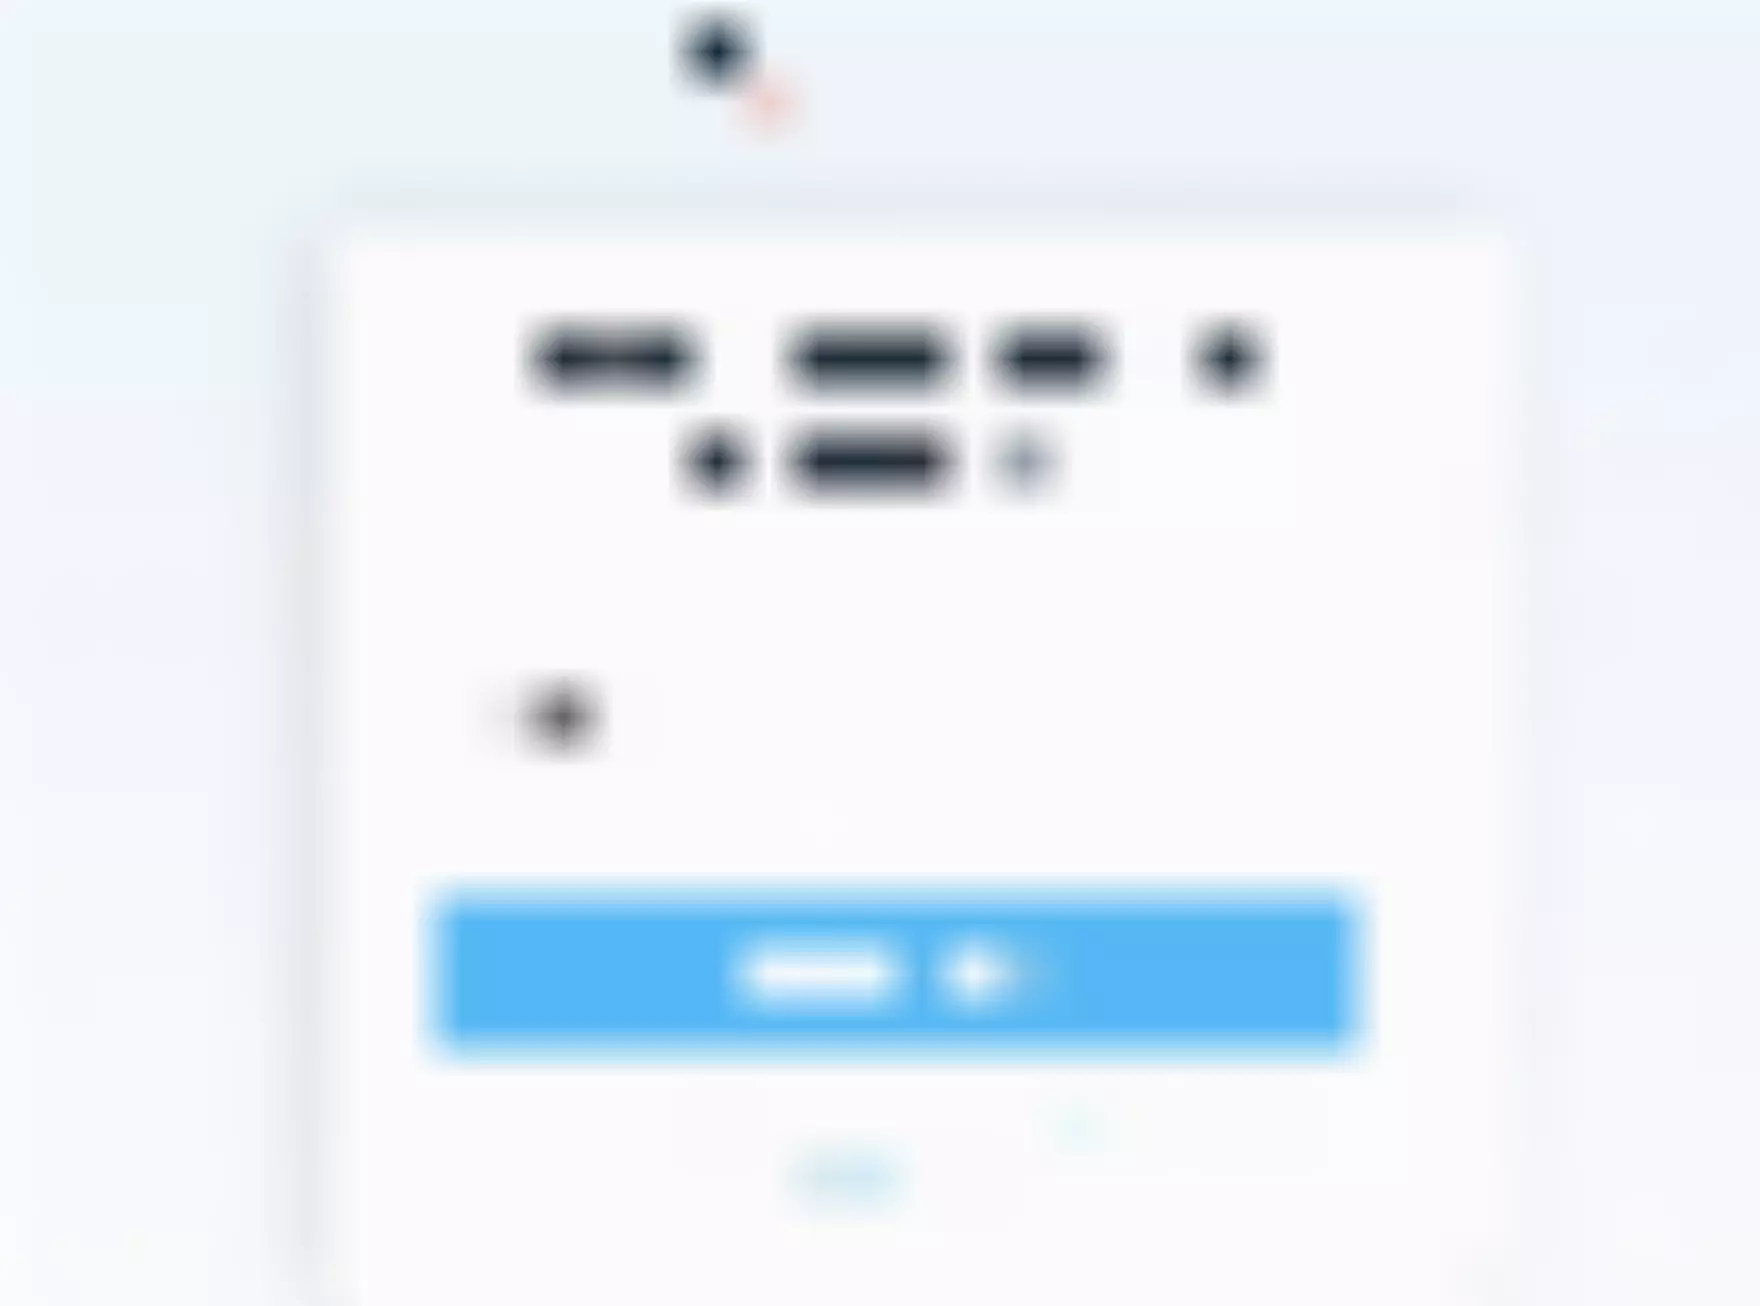 A progress bar implemented by Click Funnels to make their SaaS onboarding flow clearer.